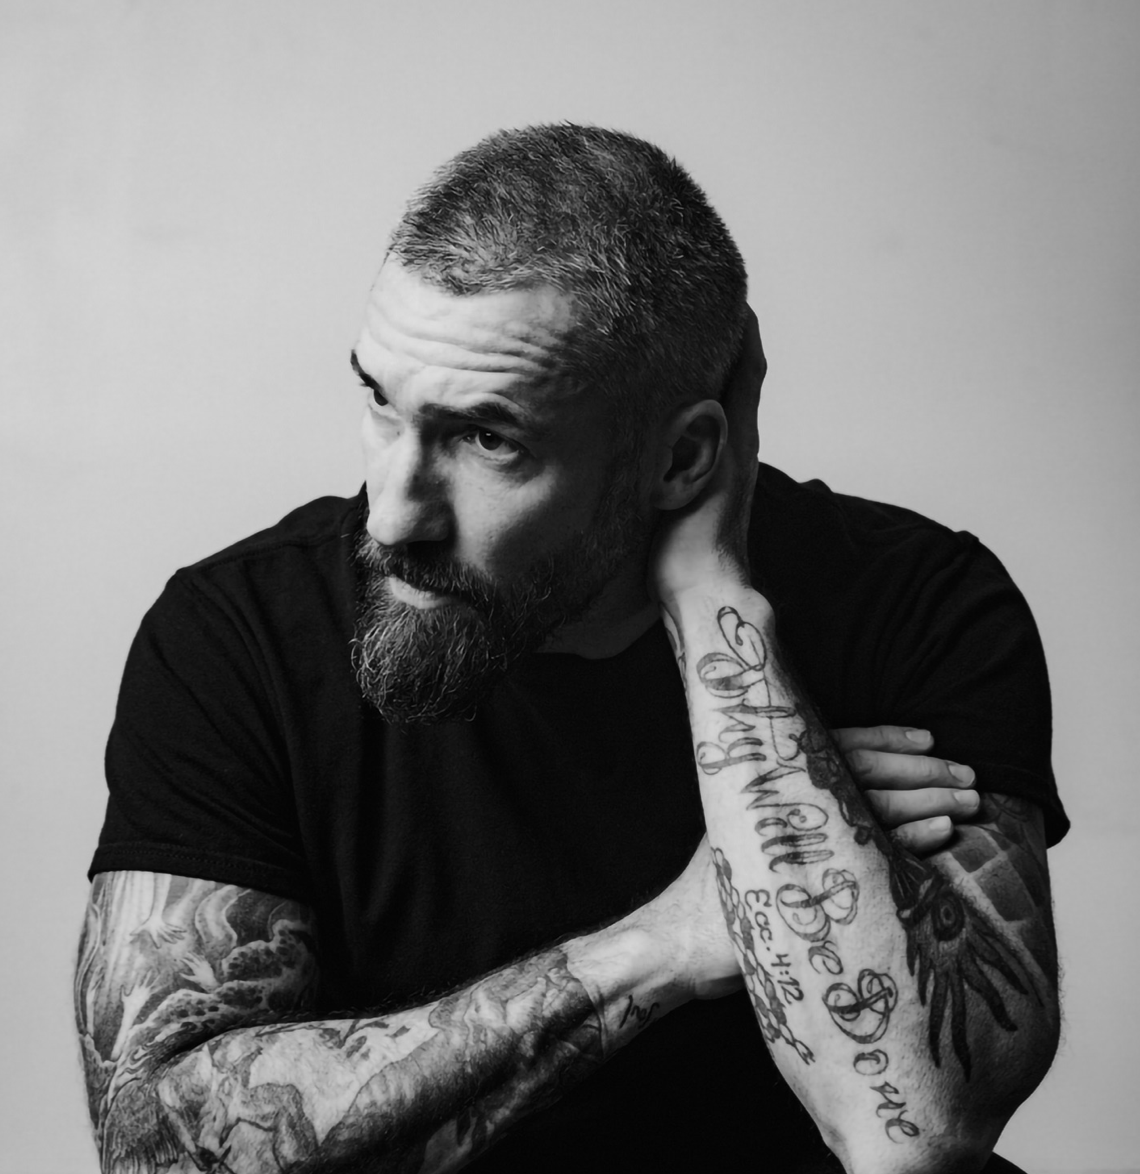 Clint Lowery Announces Solo Album "God Bless the Renegades" Out 1/31 on Rise Records, Drops New Song "King"